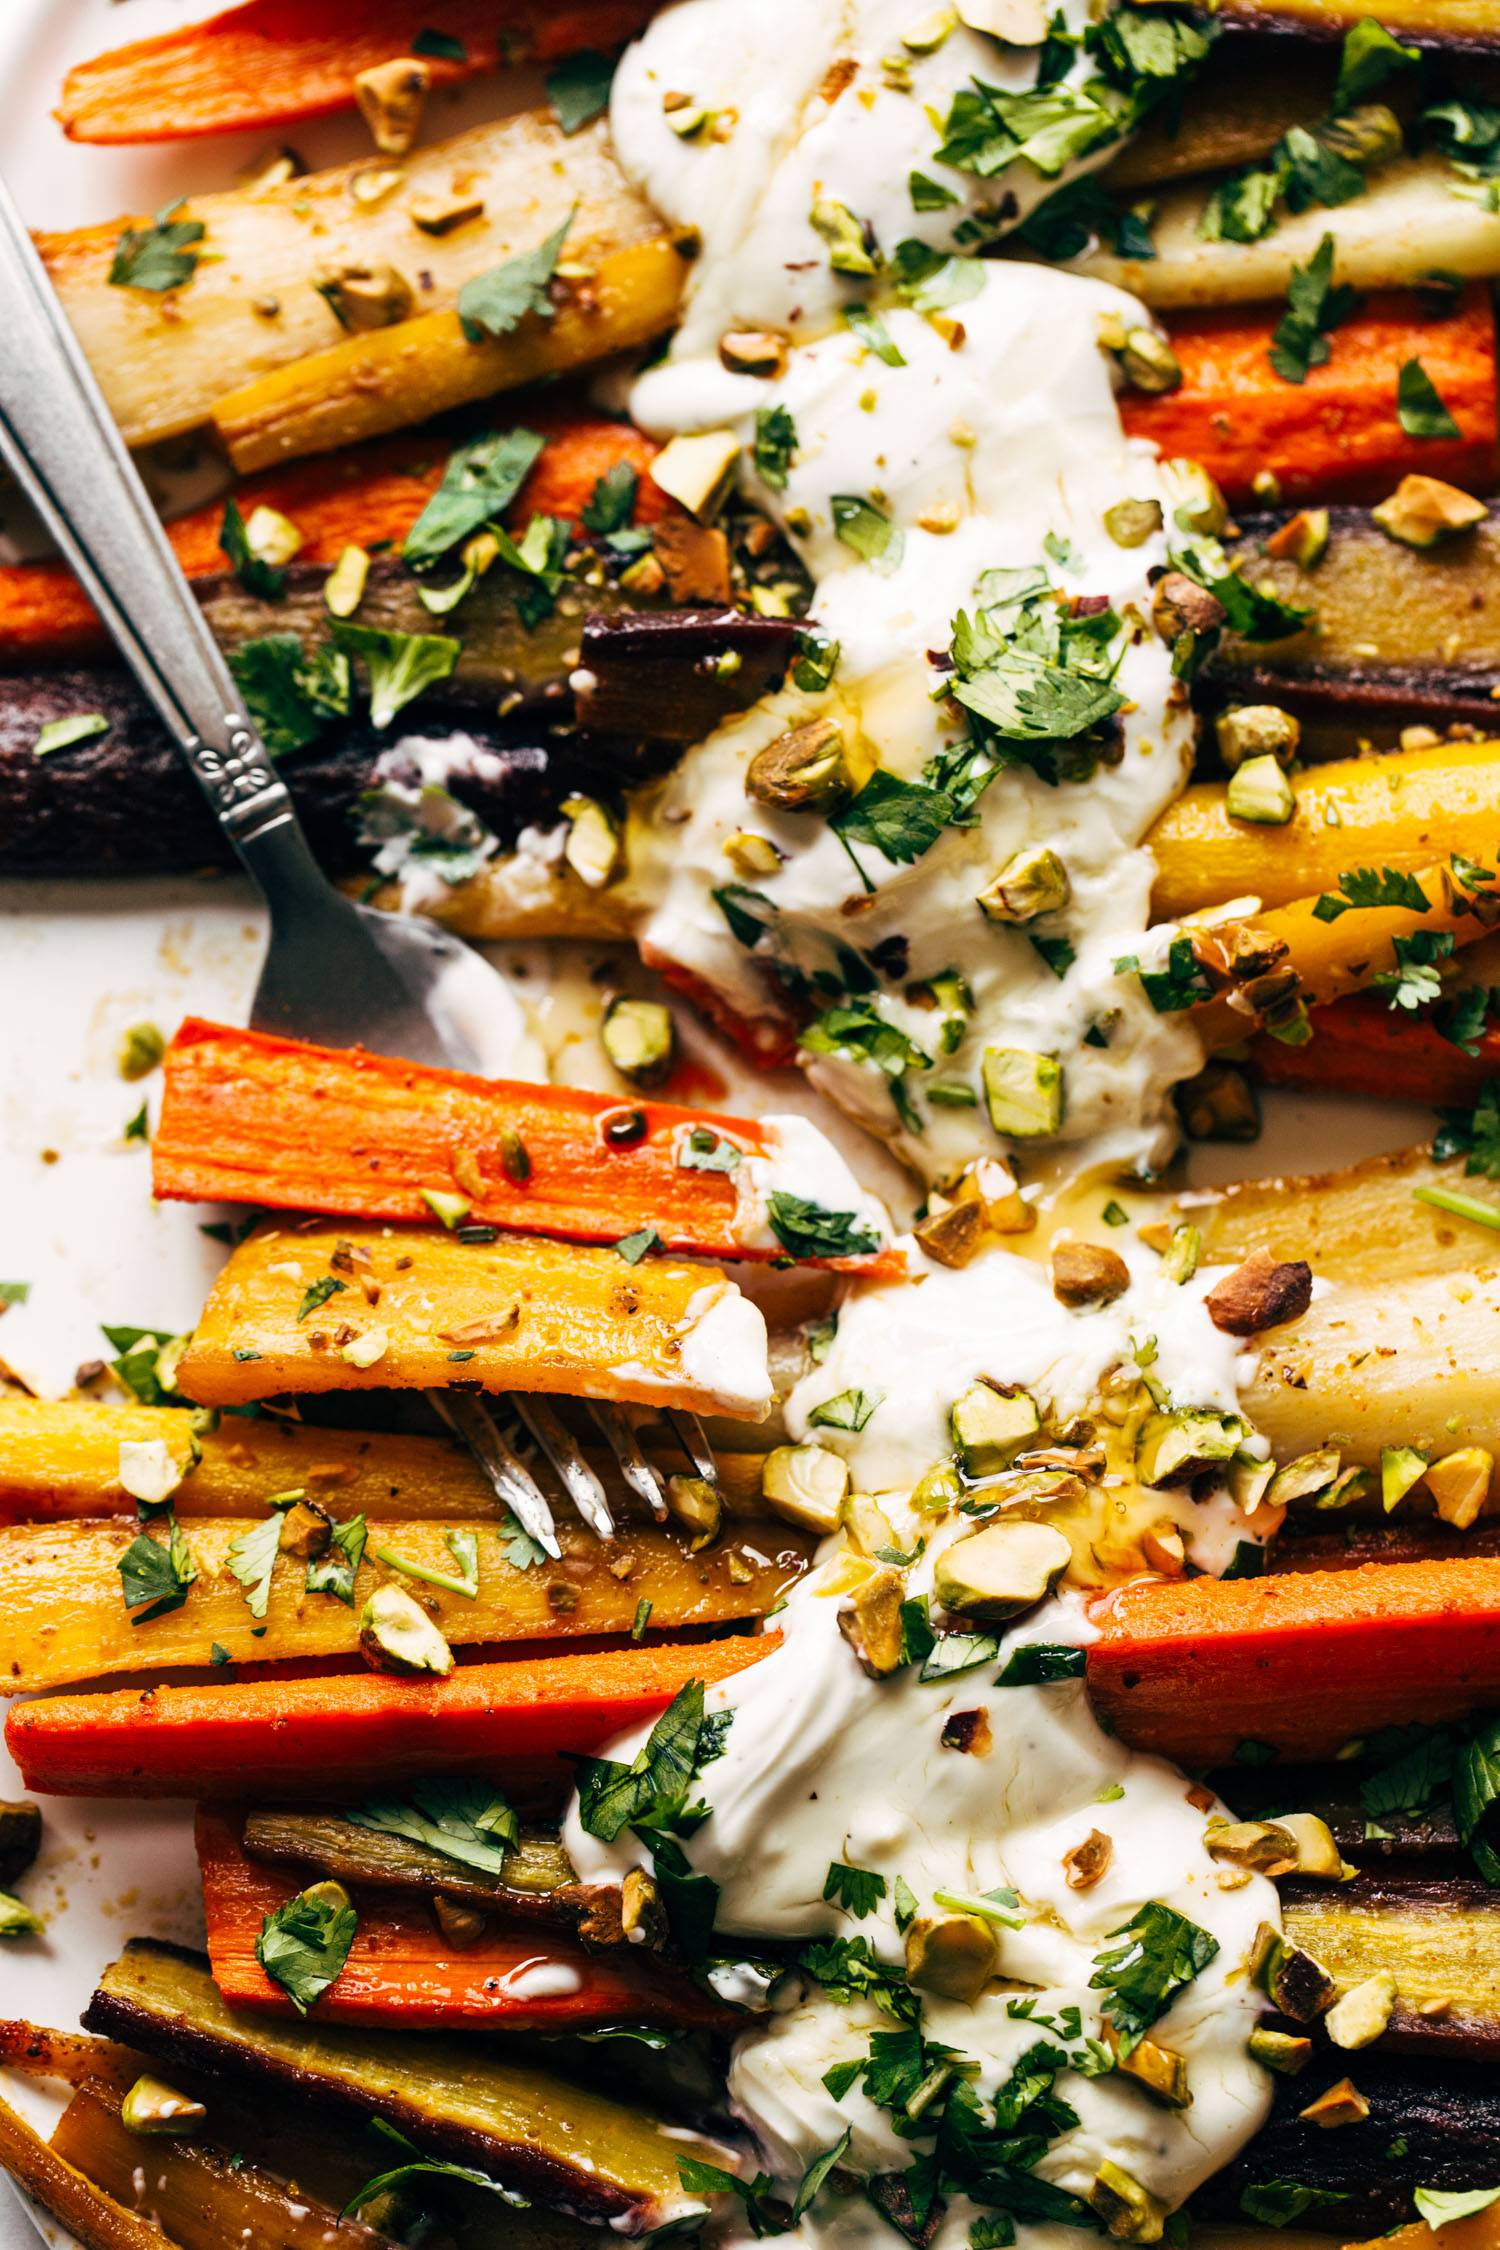 Heirloom carrots on a sheet pan with yogurt sauce and a fork.